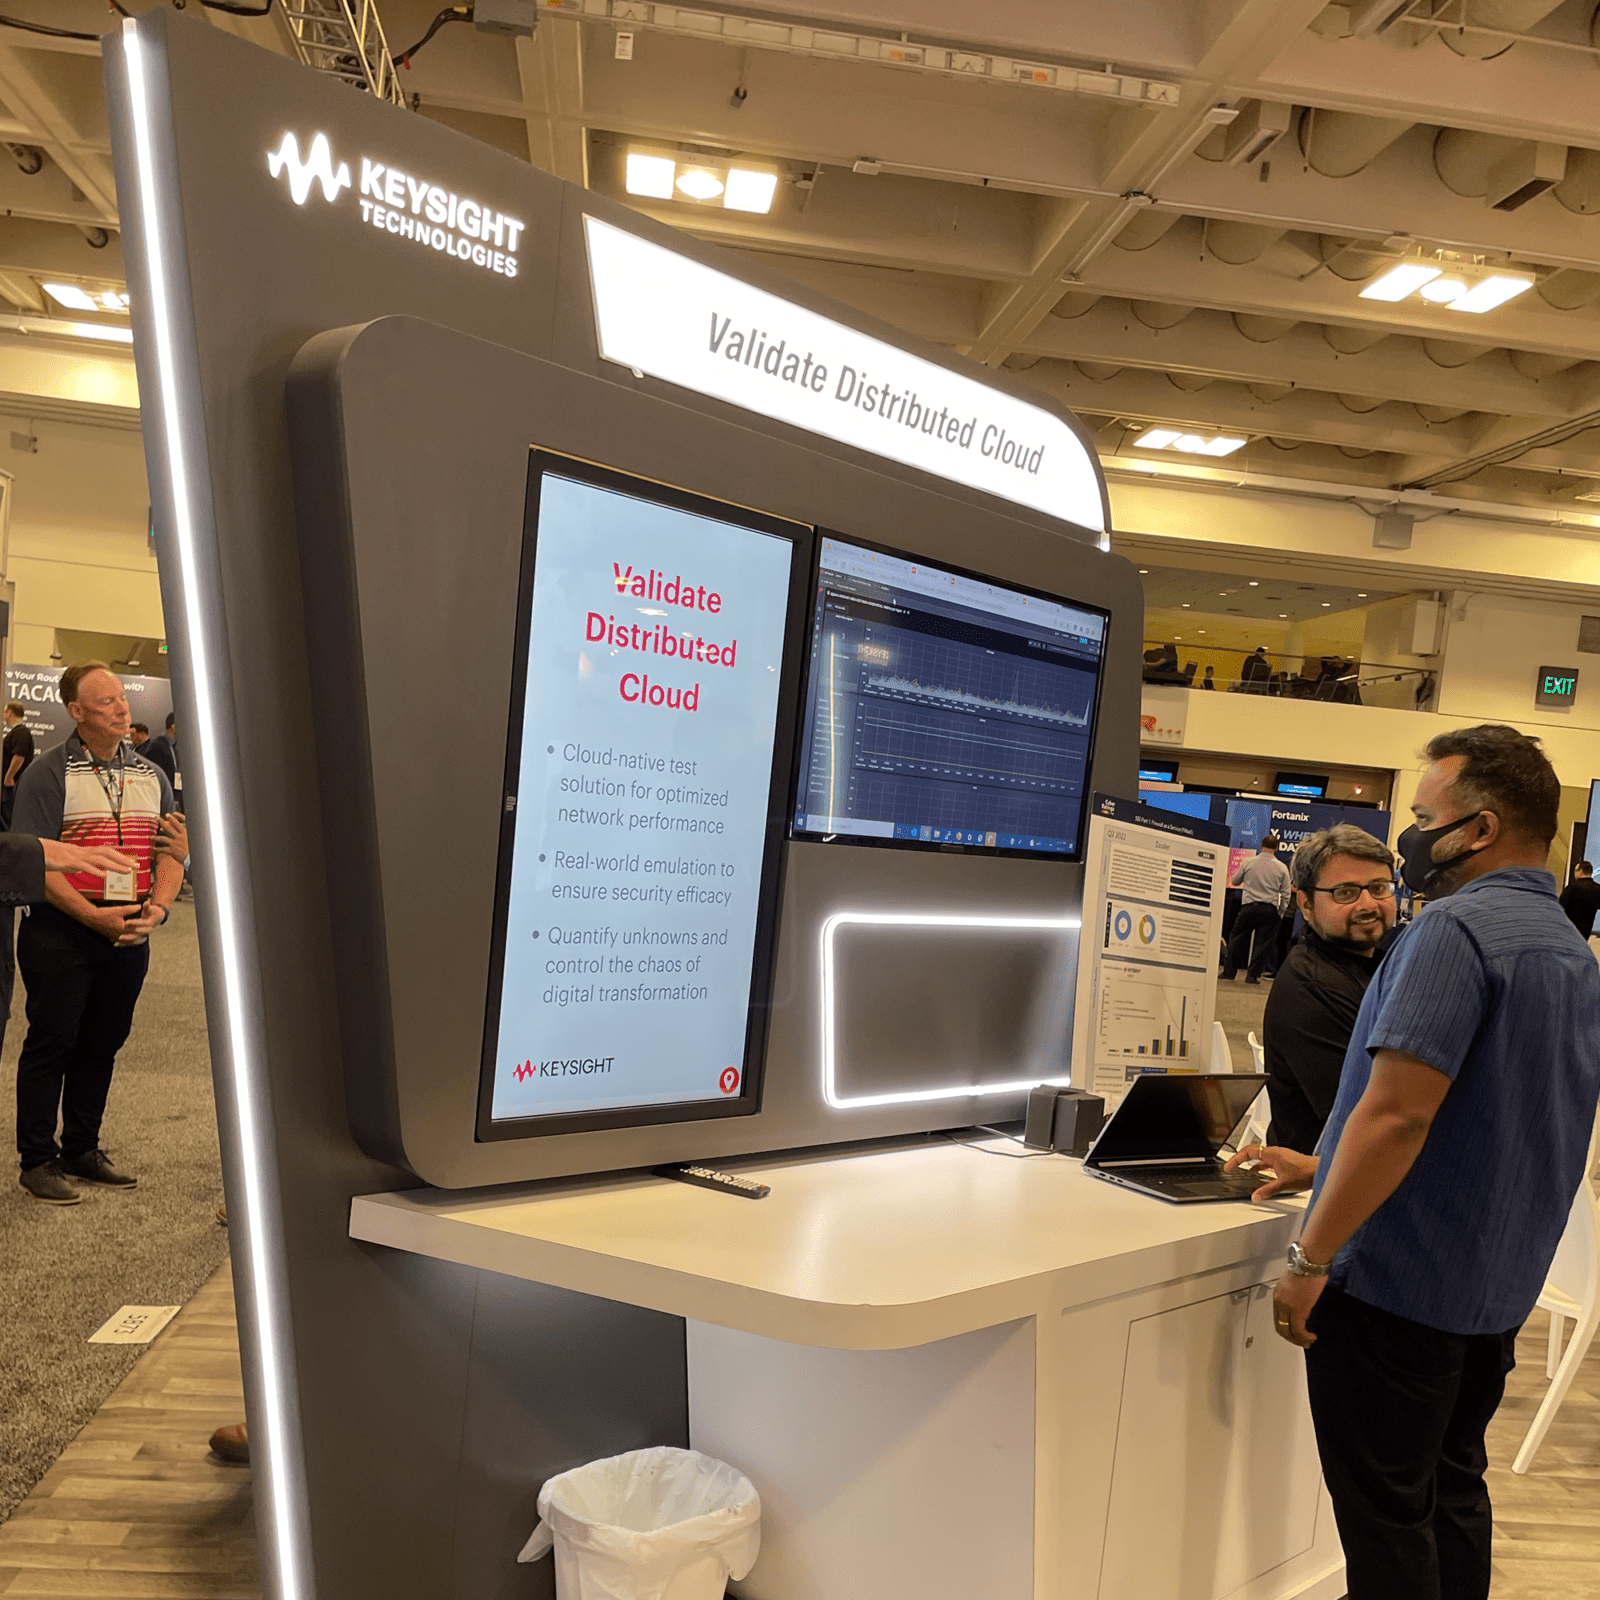 Keysight Technologies' booth featured modern angles and edge lighting